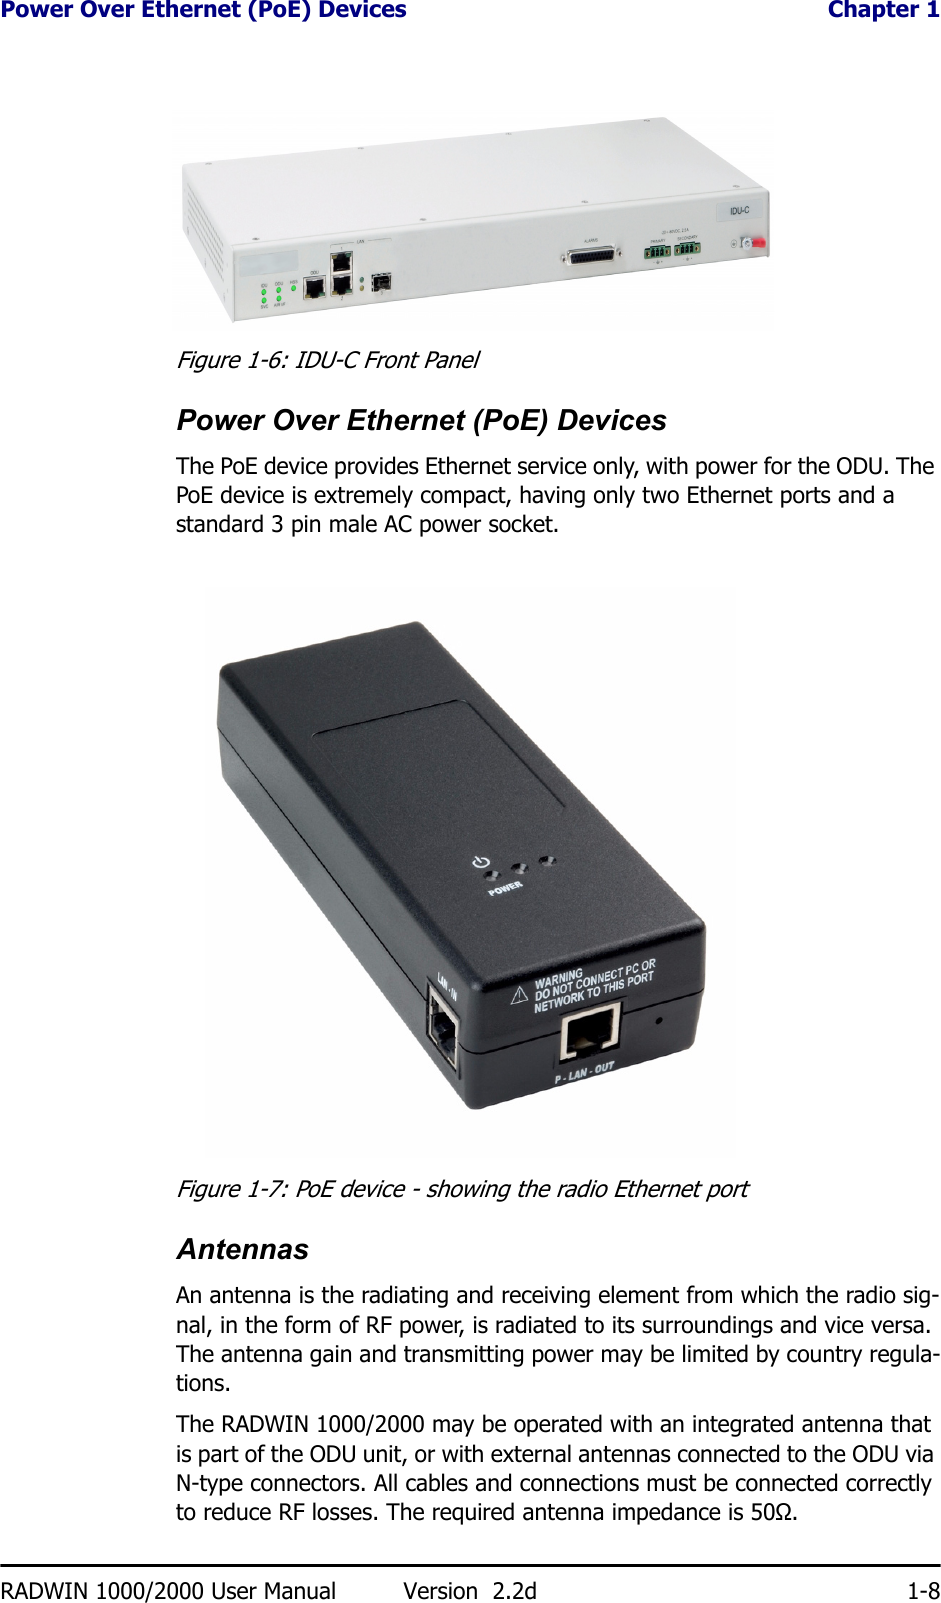 Power Over Ethernet (PoE) Devices  Chapter 1RADWIN 1000/2000 User Manual Version  2.2d 1-8Figure 1-6: IDU-C Front PanelPower Over Ethernet (PoE) DevicesThe PoE device provides Ethernet service only, with power for the ODU. The PoE device is extremely compact, having only two Ethernet ports and a standard 3 pin male AC power socket.Figure 1-7: PoE device - showing the radio Ethernet portAntennasAn antenna is the radiating and receiving element from which the radio sig-nal, in the form of RF power, is radiated to its surroundings and vice versa. The antenna gain and transmitting power may be limited by country regula-tions.The RADWIN 1000/2000 may be operated with an integrated antenna that is part of the ODU unit, or with external antennas connected to the ODU via N-type connectors. All cables and connections must be connected correctly to reduce RF losses. The required antenna impedance is 50Ω.